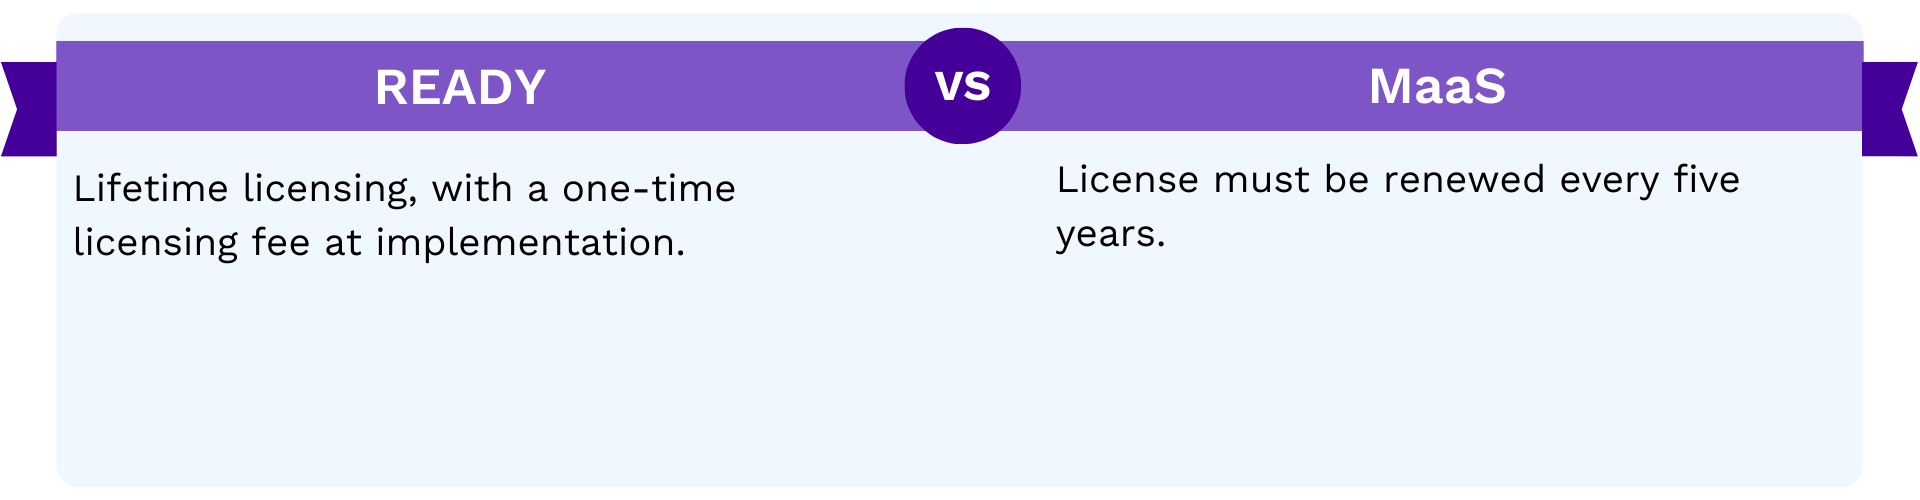 Licensing Considerations: Lifetime vs. 5-year renewal with MaaS – upfront one-time fee vs. recurring cost